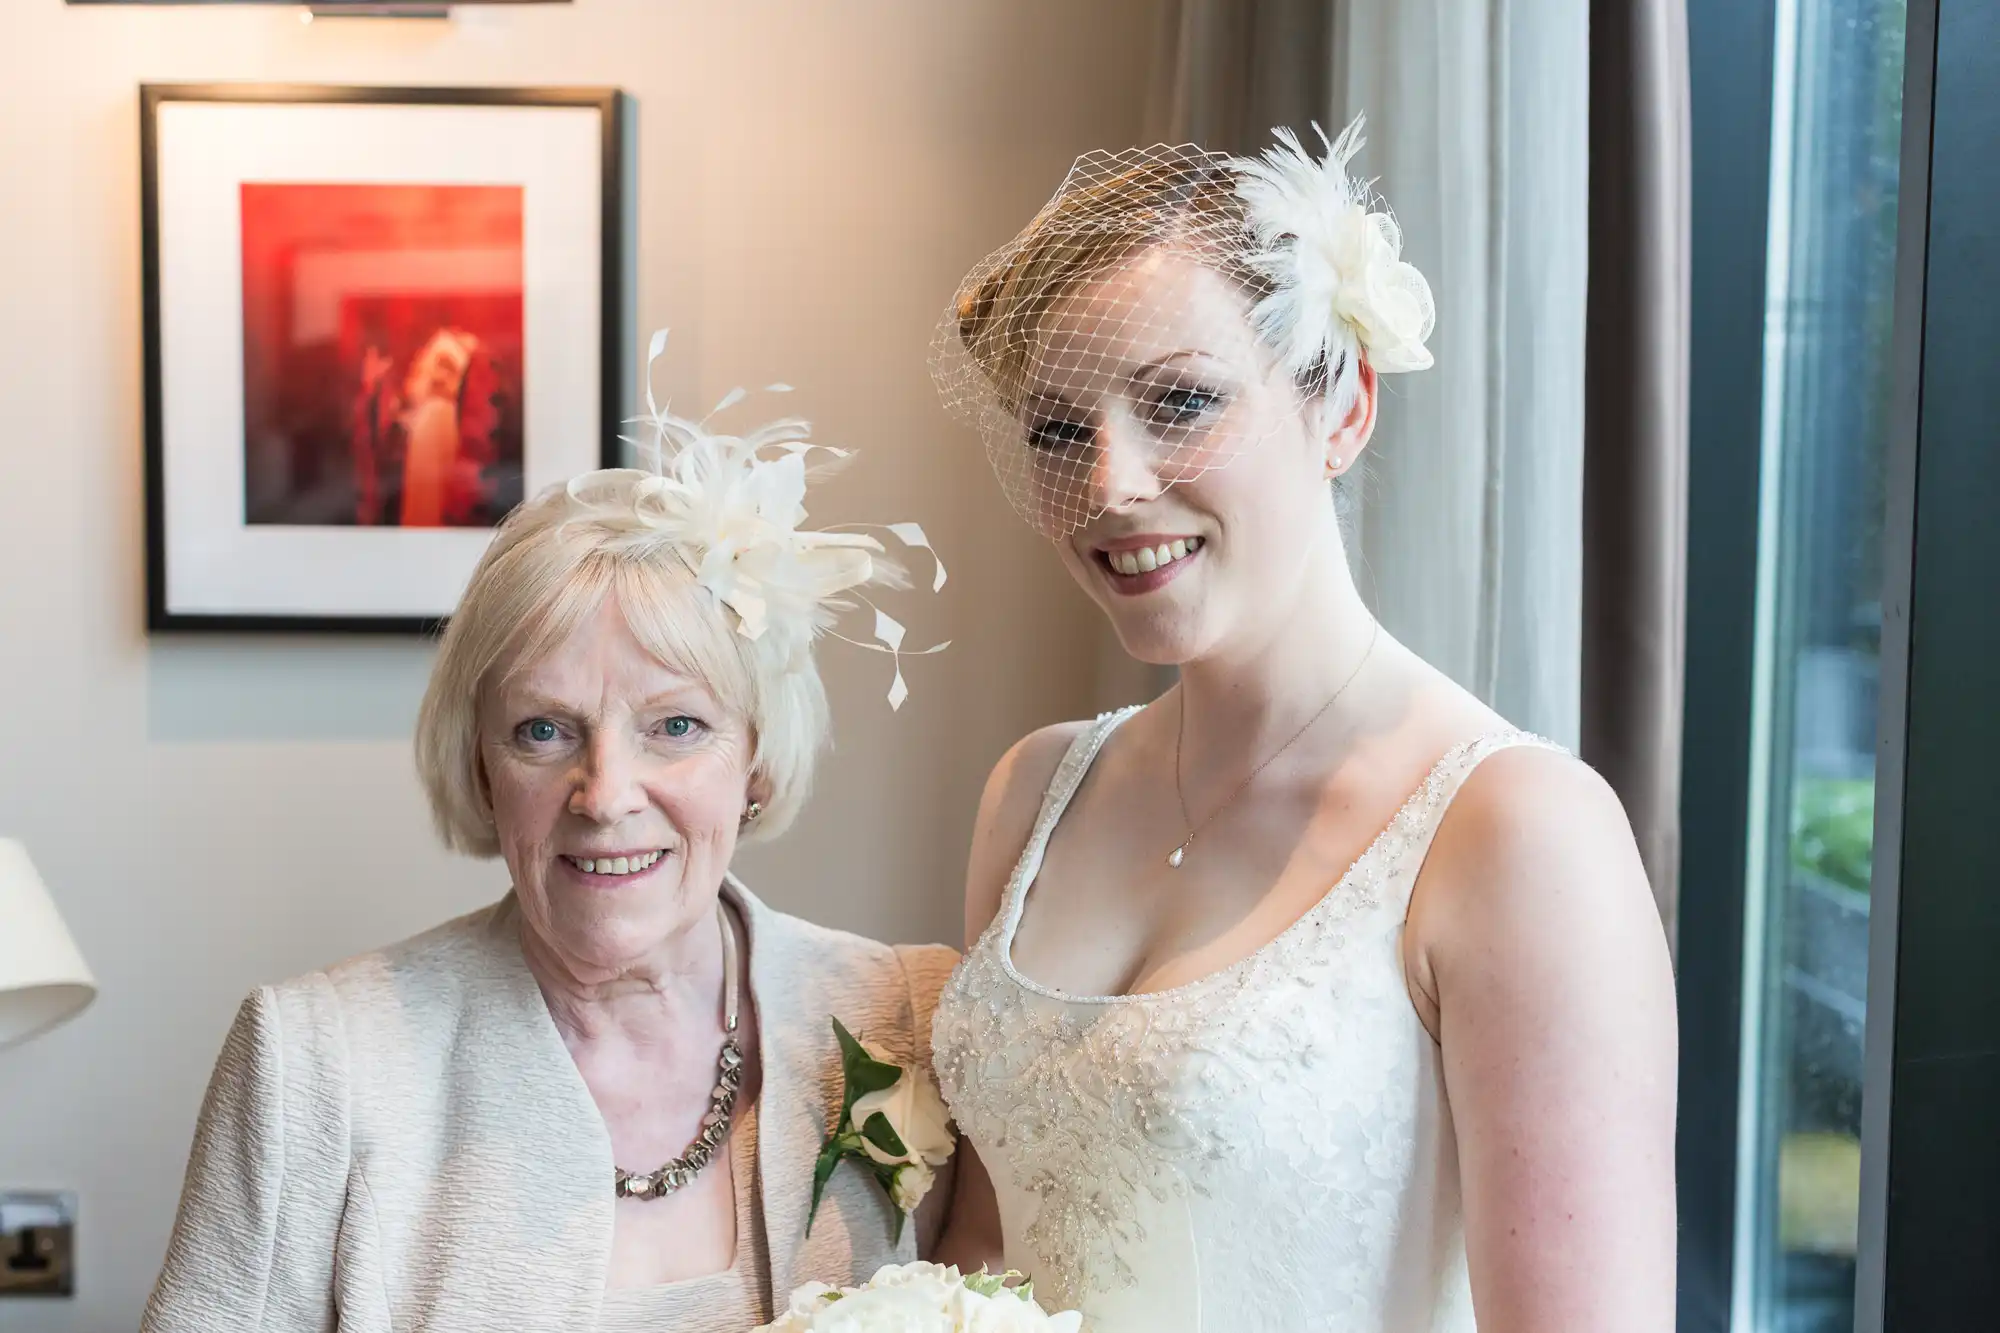 A bride in a white dress and veil stands next to an older woman in a beige outfit, both smiling indoors.